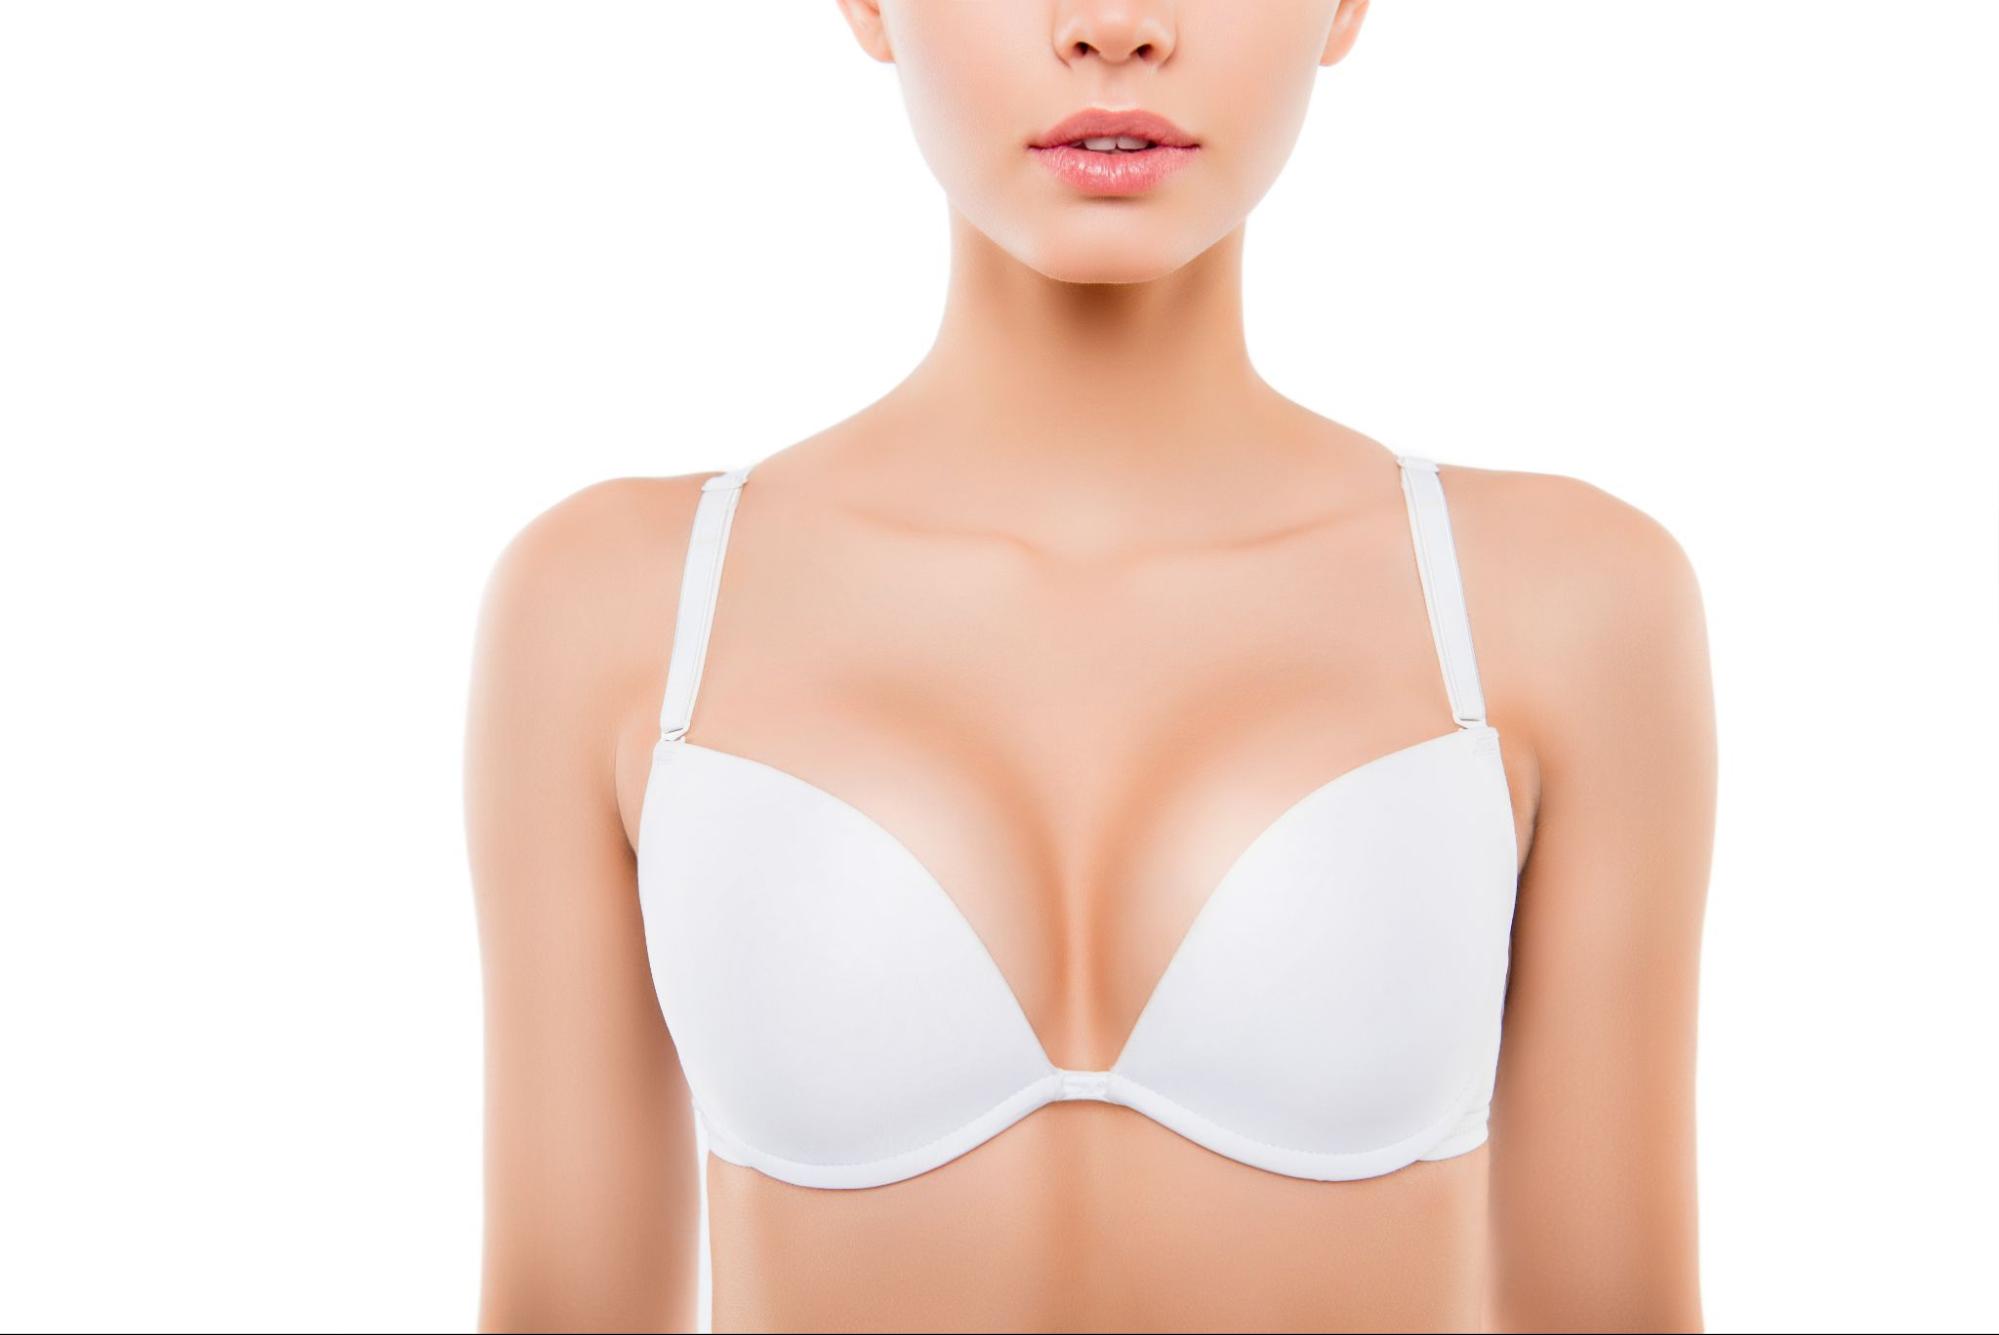 Should You Combine A Breast Lift With Breast Augmentation?